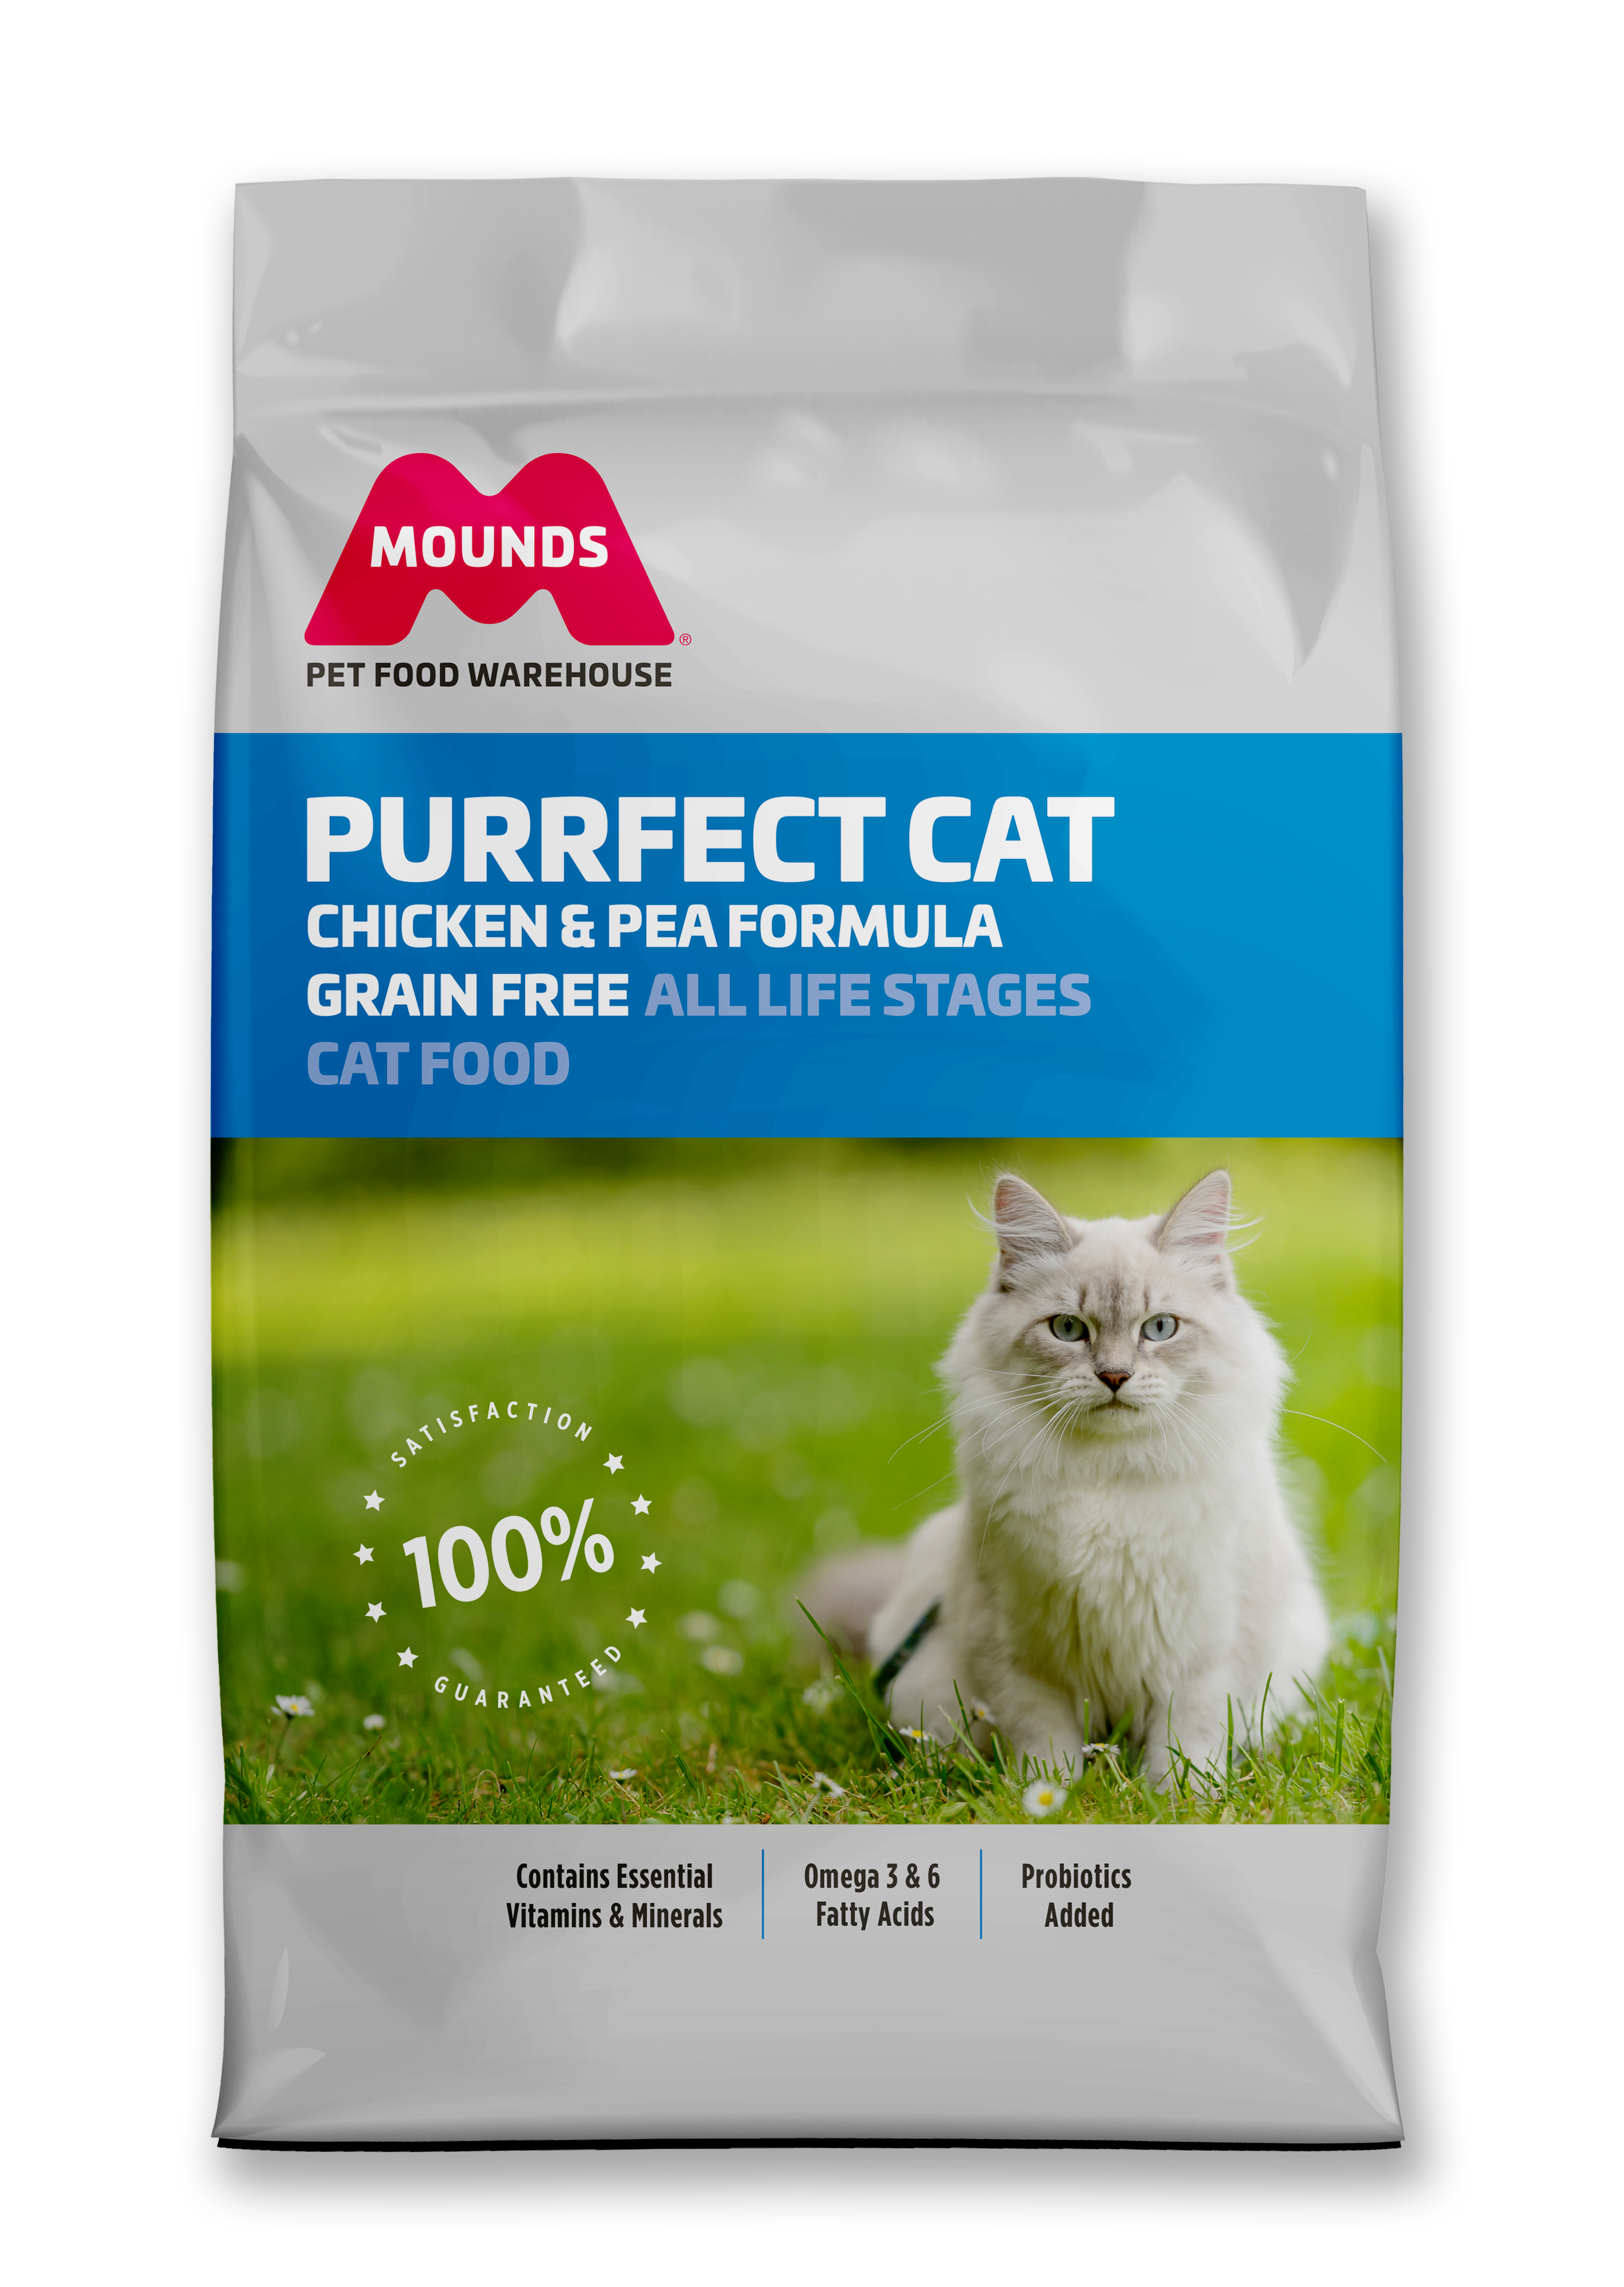 Mounds Purrfect Cat Grain Free Chicken & Pea 5#